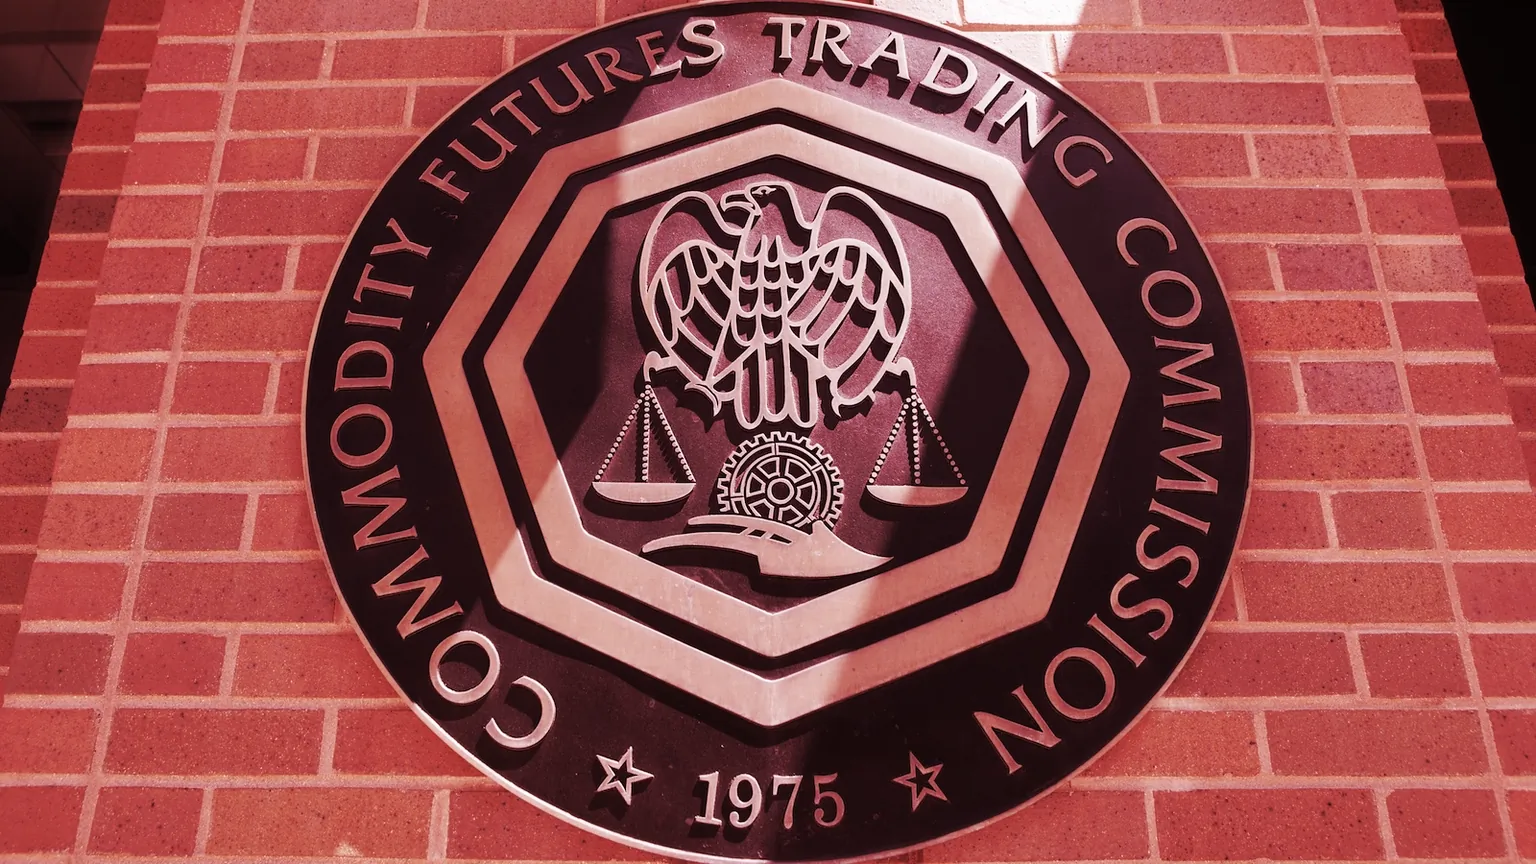 WASHINGTON, DC - AUGUST 20: Emblem at the U.S. Commodity Futures Trading Commission in Washington, DC on August 20, 2017. ; Shutterstock ID 781859251; Client/Licensee: decryptmedia